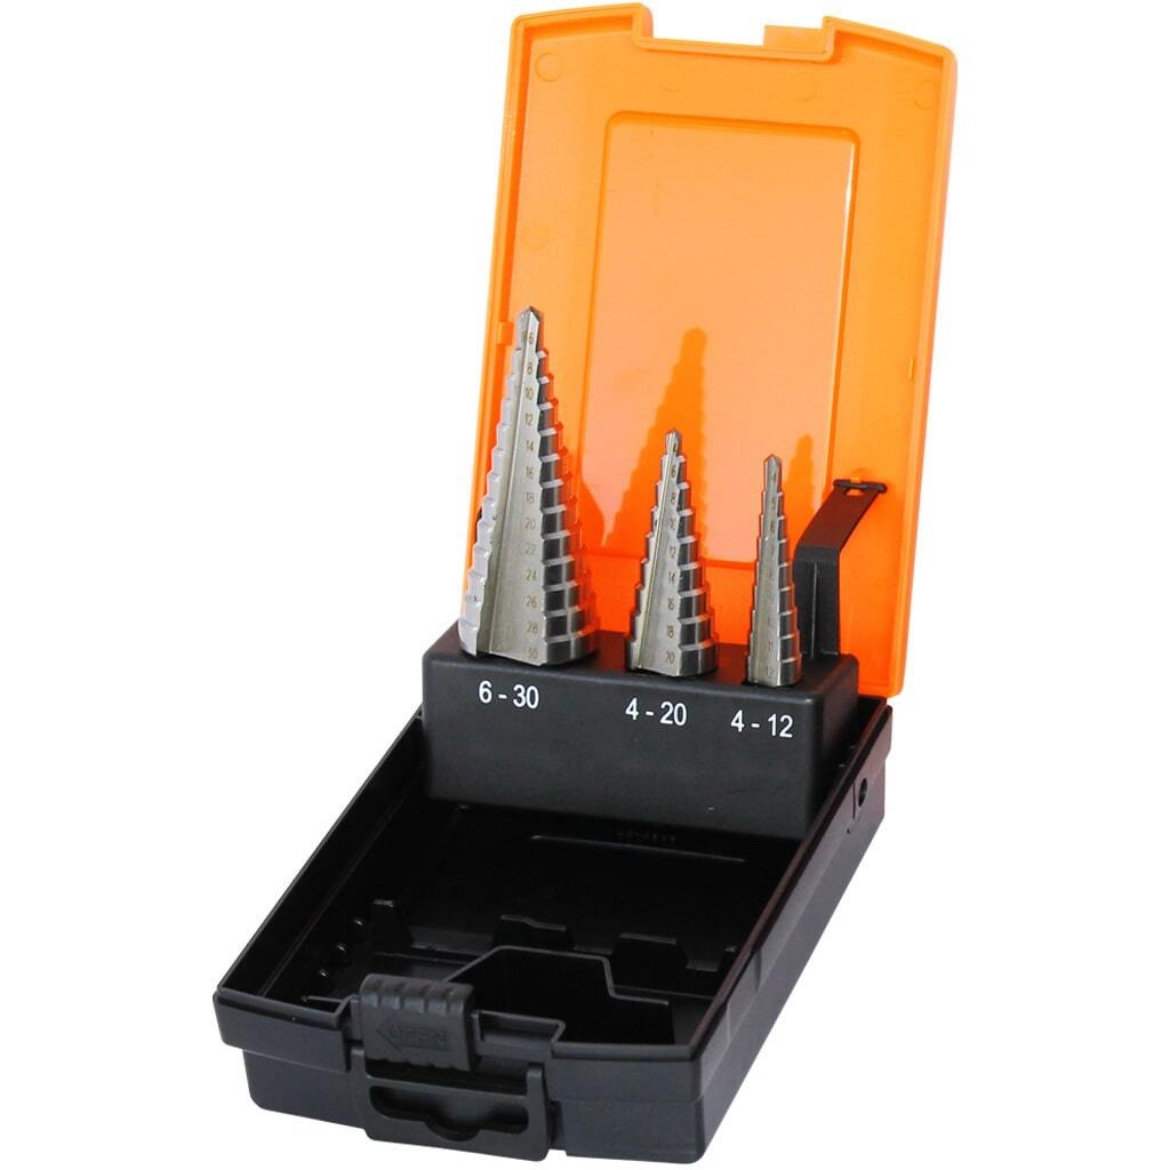 Picture of STEP DRILL SET 3PCE METRIC 4mm-12mm, 4mm-20mm, 6mm-30mm